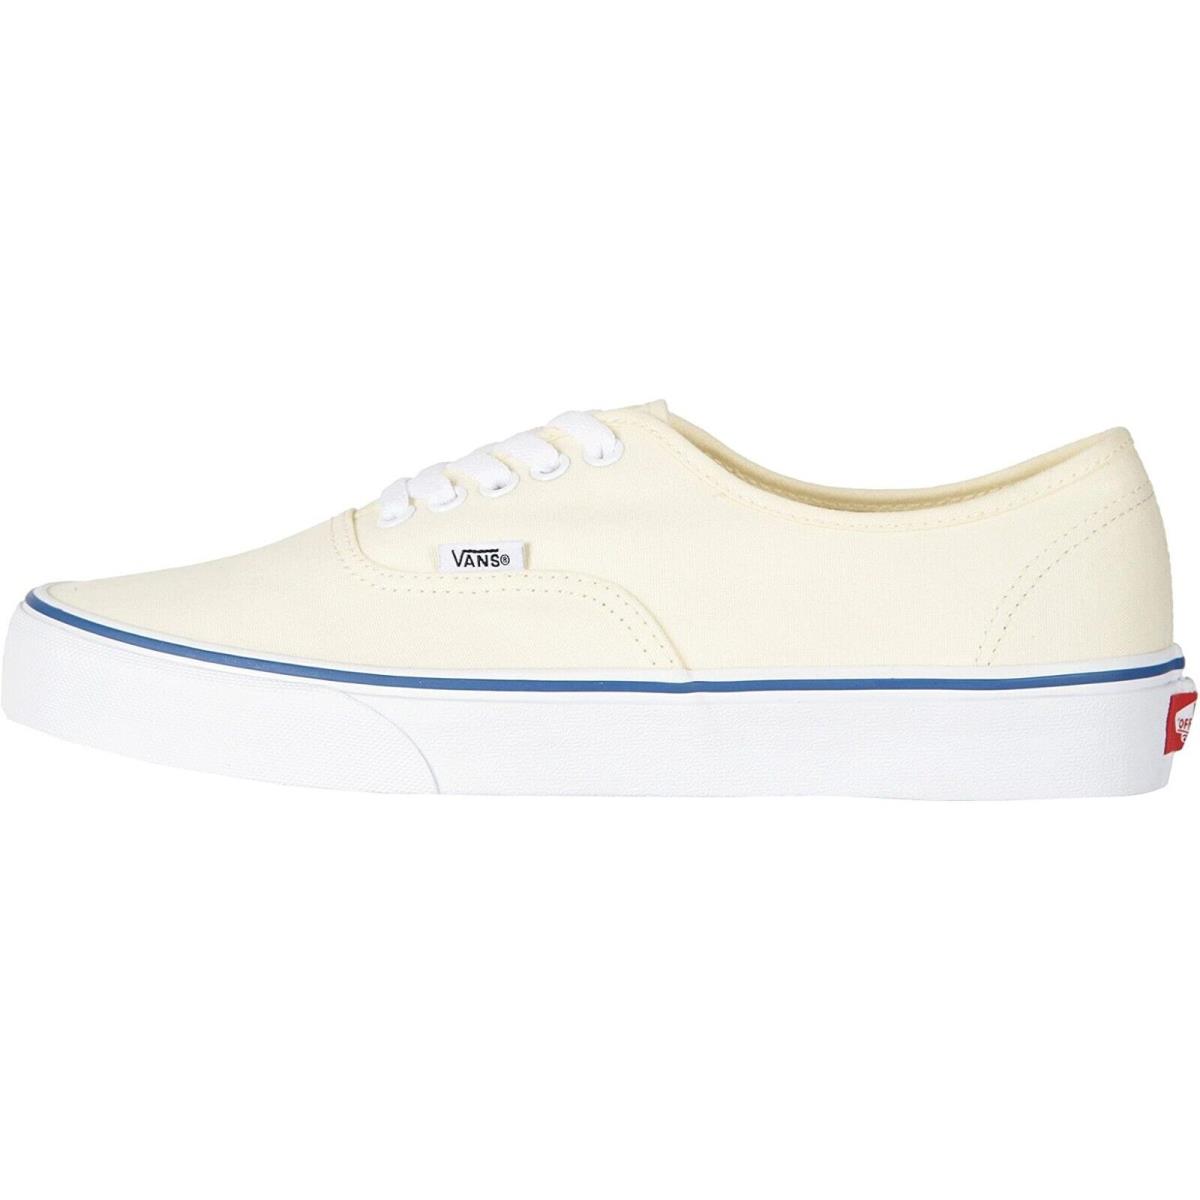 Vans Unisex Mens Womens Canvas Sneakers Skate Shoes Off White